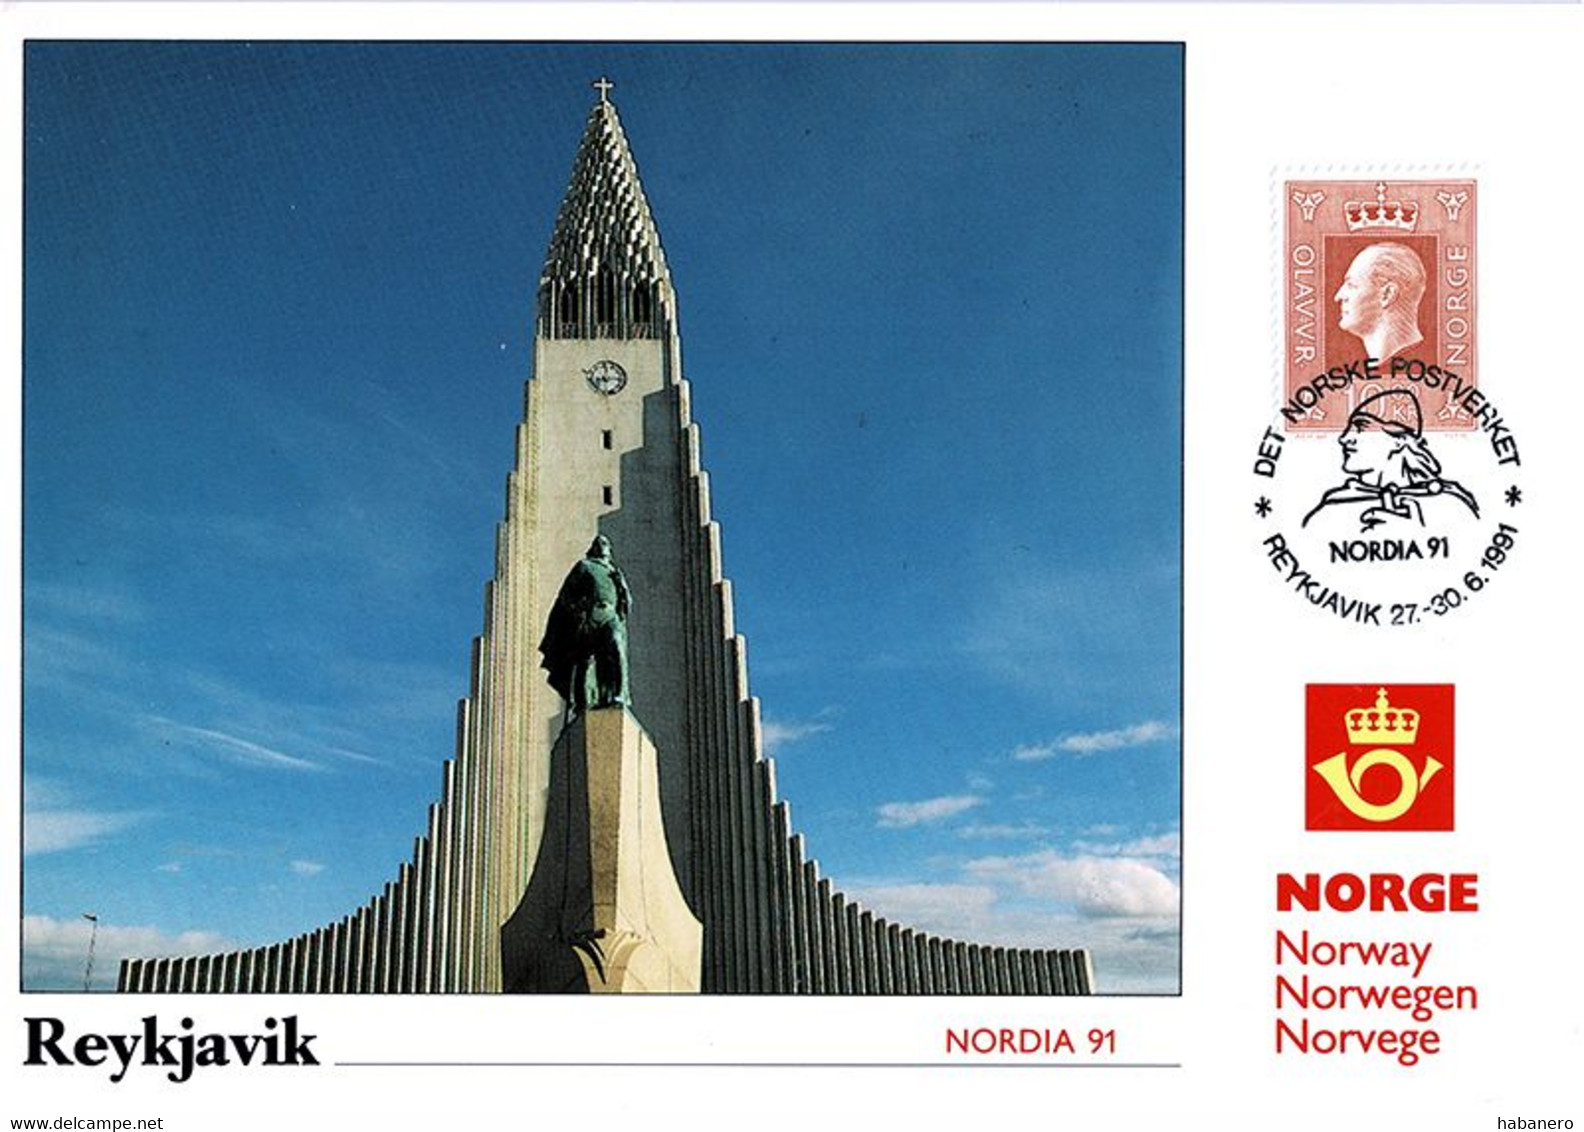 NORWAY 1991 PU82 NORDIA '91 REYKJAVIK EXHIBITION CARD - Maximum Cards & Covers